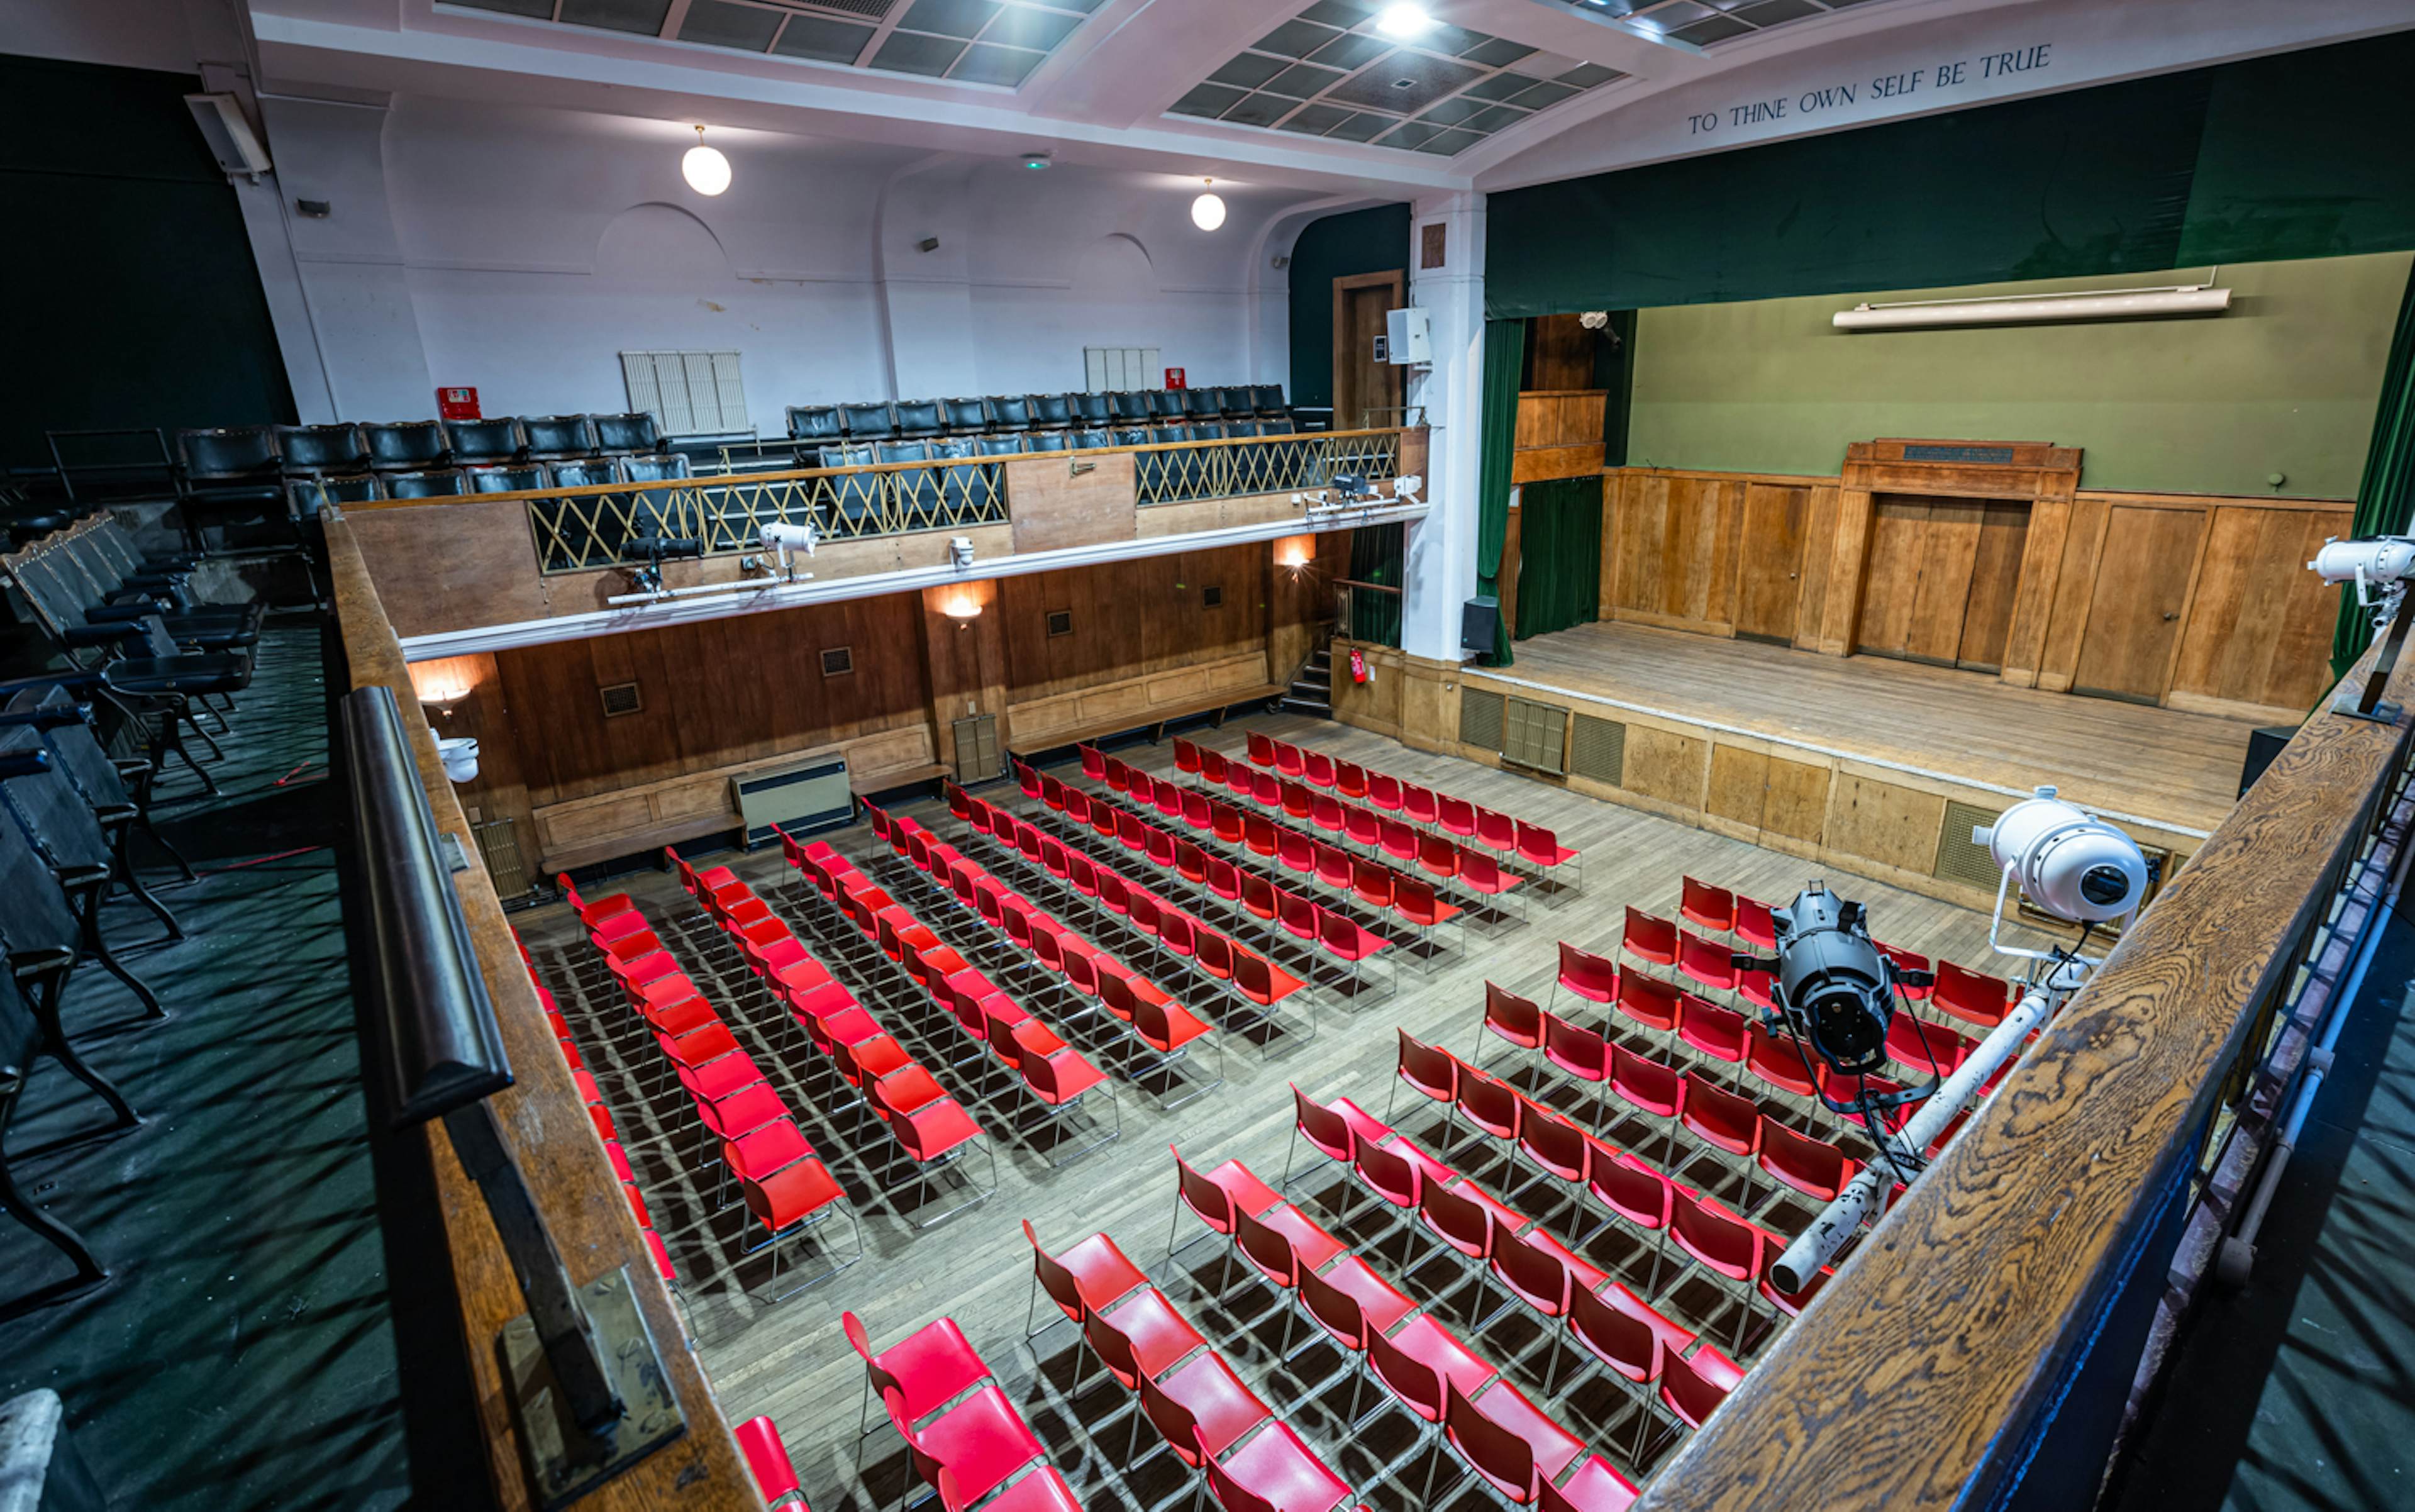 Conway Hall - image 1